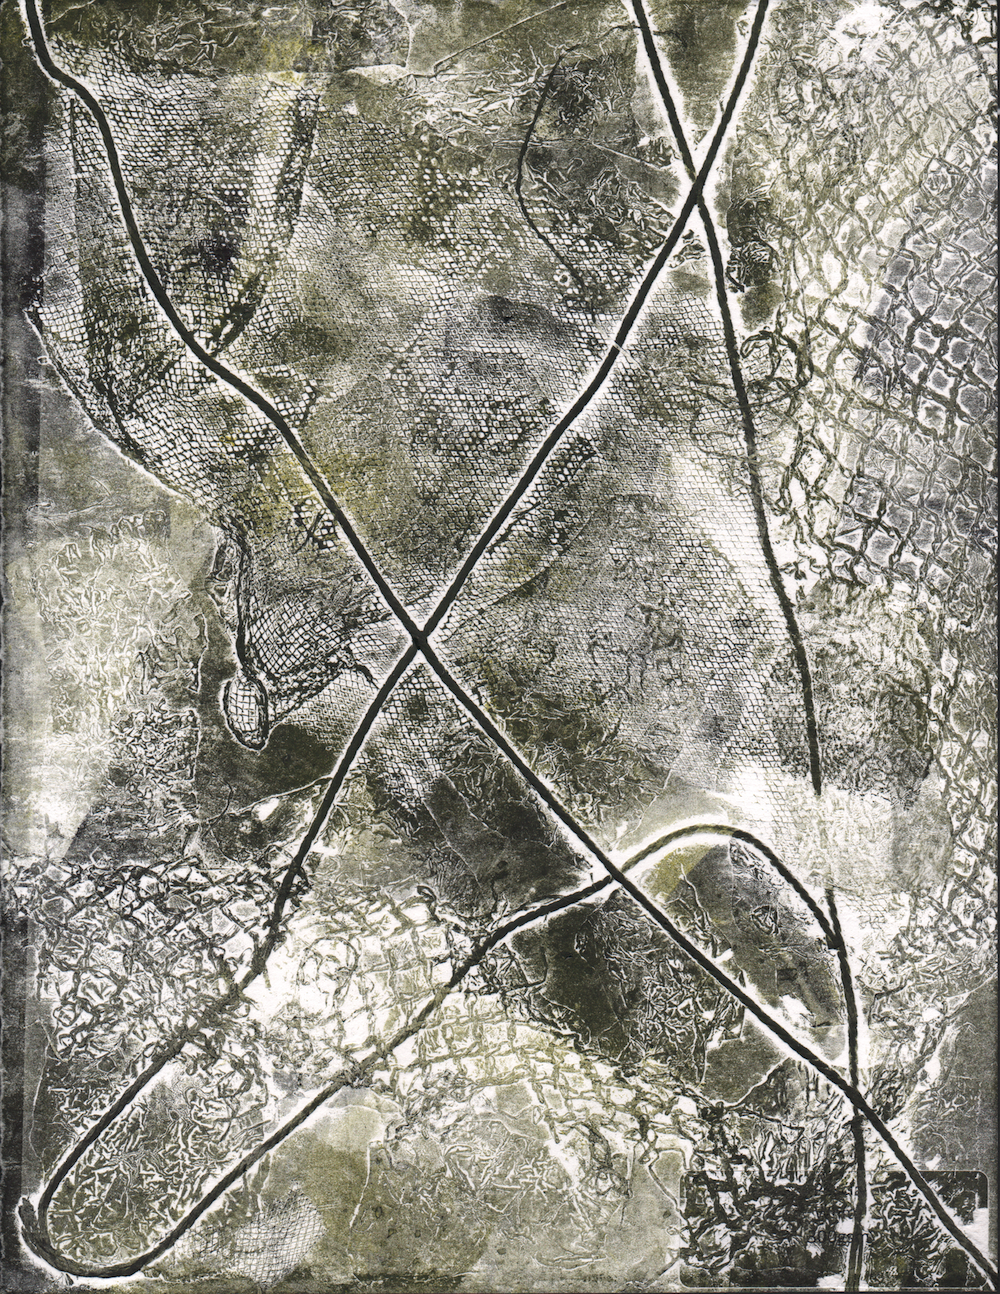 scanned and digitally manipulated image of threads, textiles, and mesh.